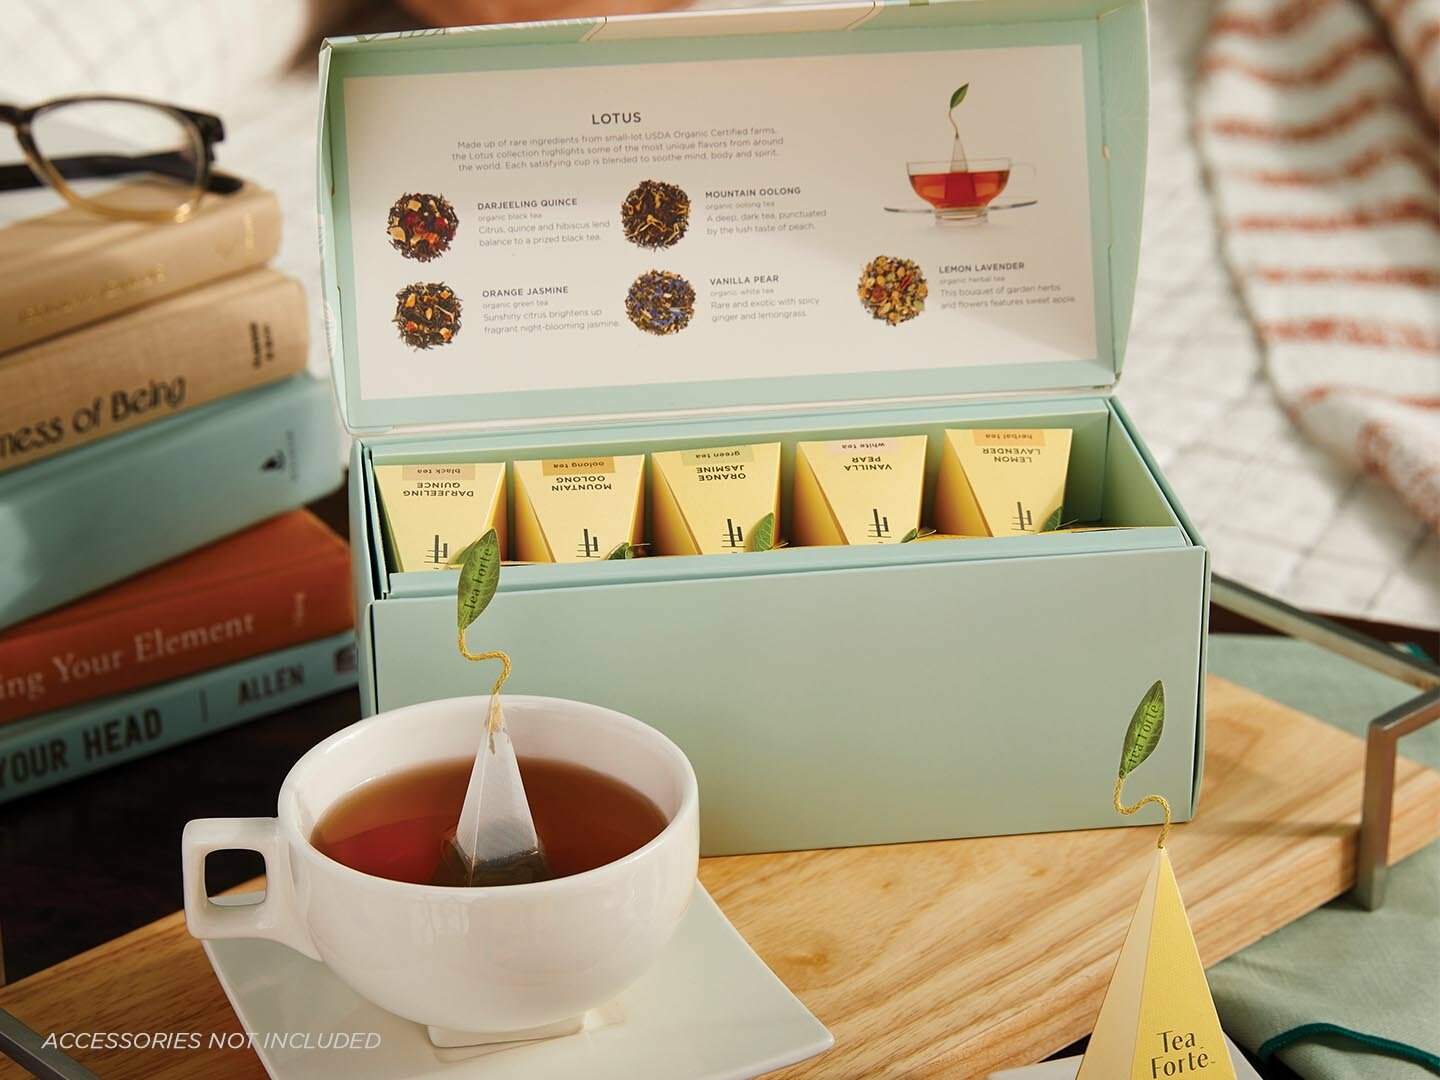 Lotus Presentation Box, open, with a teacup